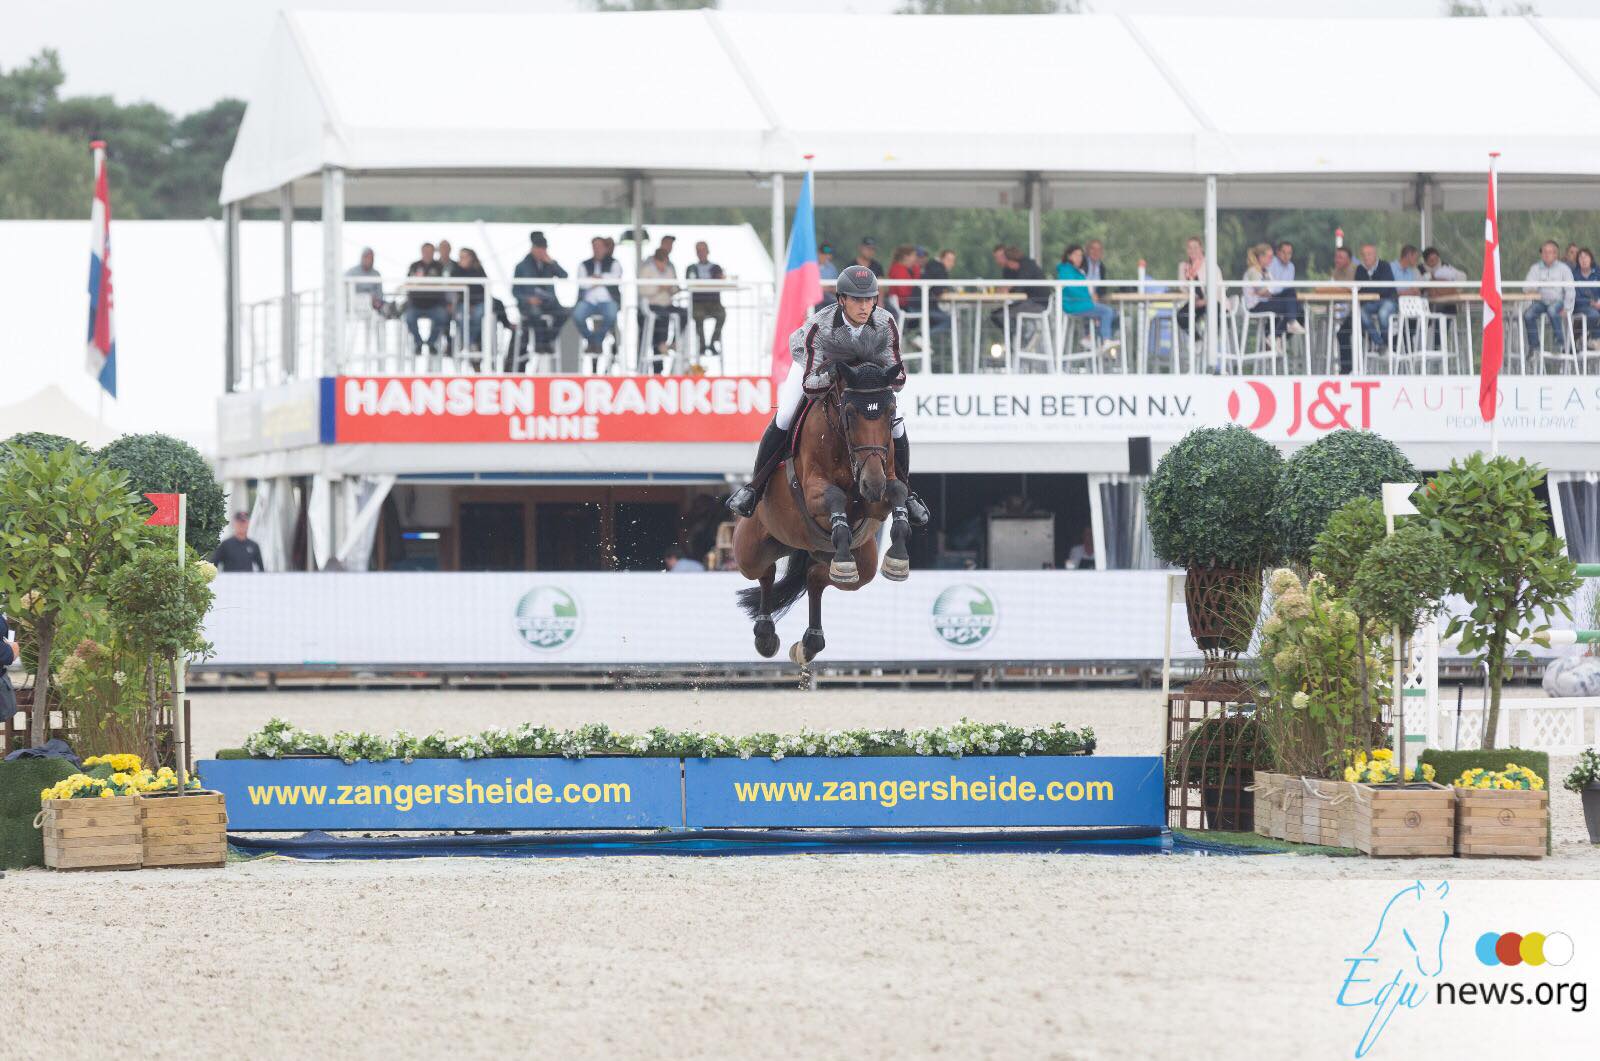 Nicola and Olivier Philippaerts go head to head in first qualifier Belgium Championships